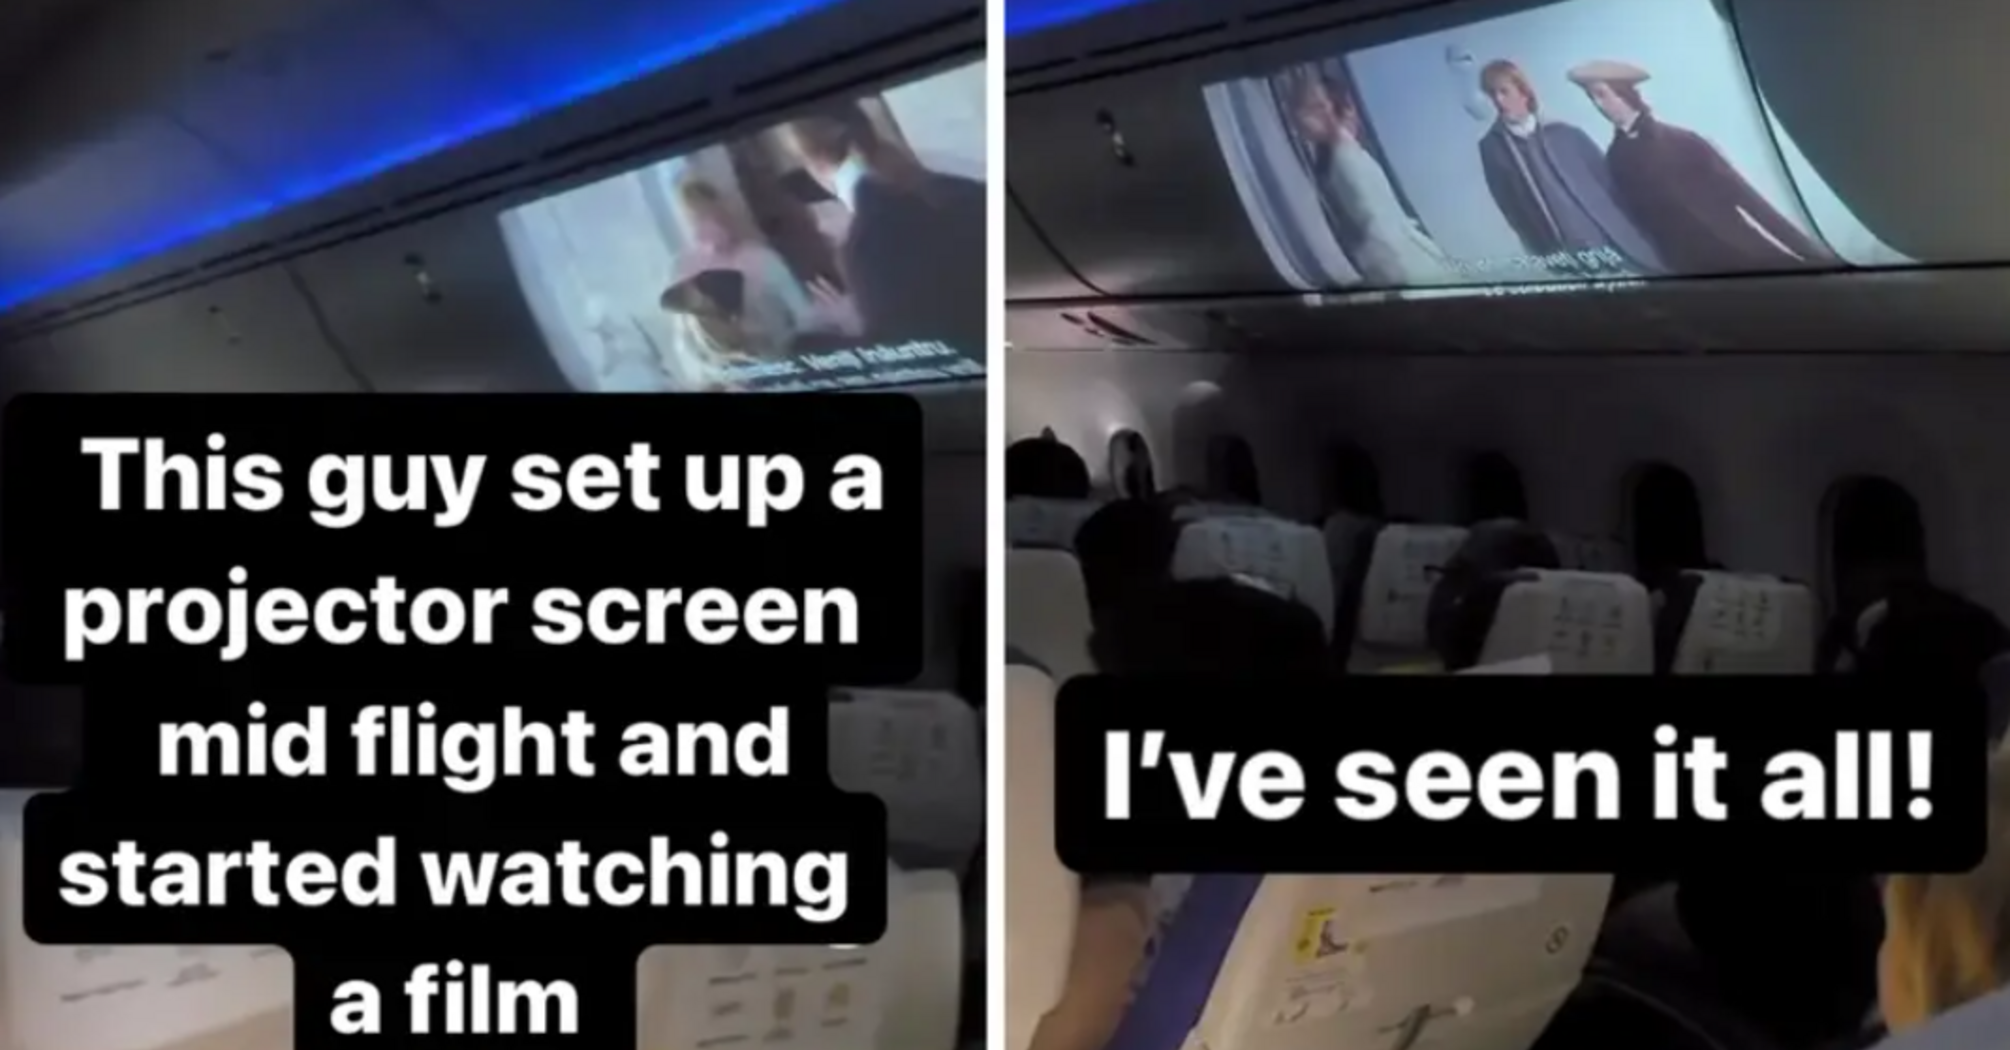 A passenger arranged a movie session on the plane